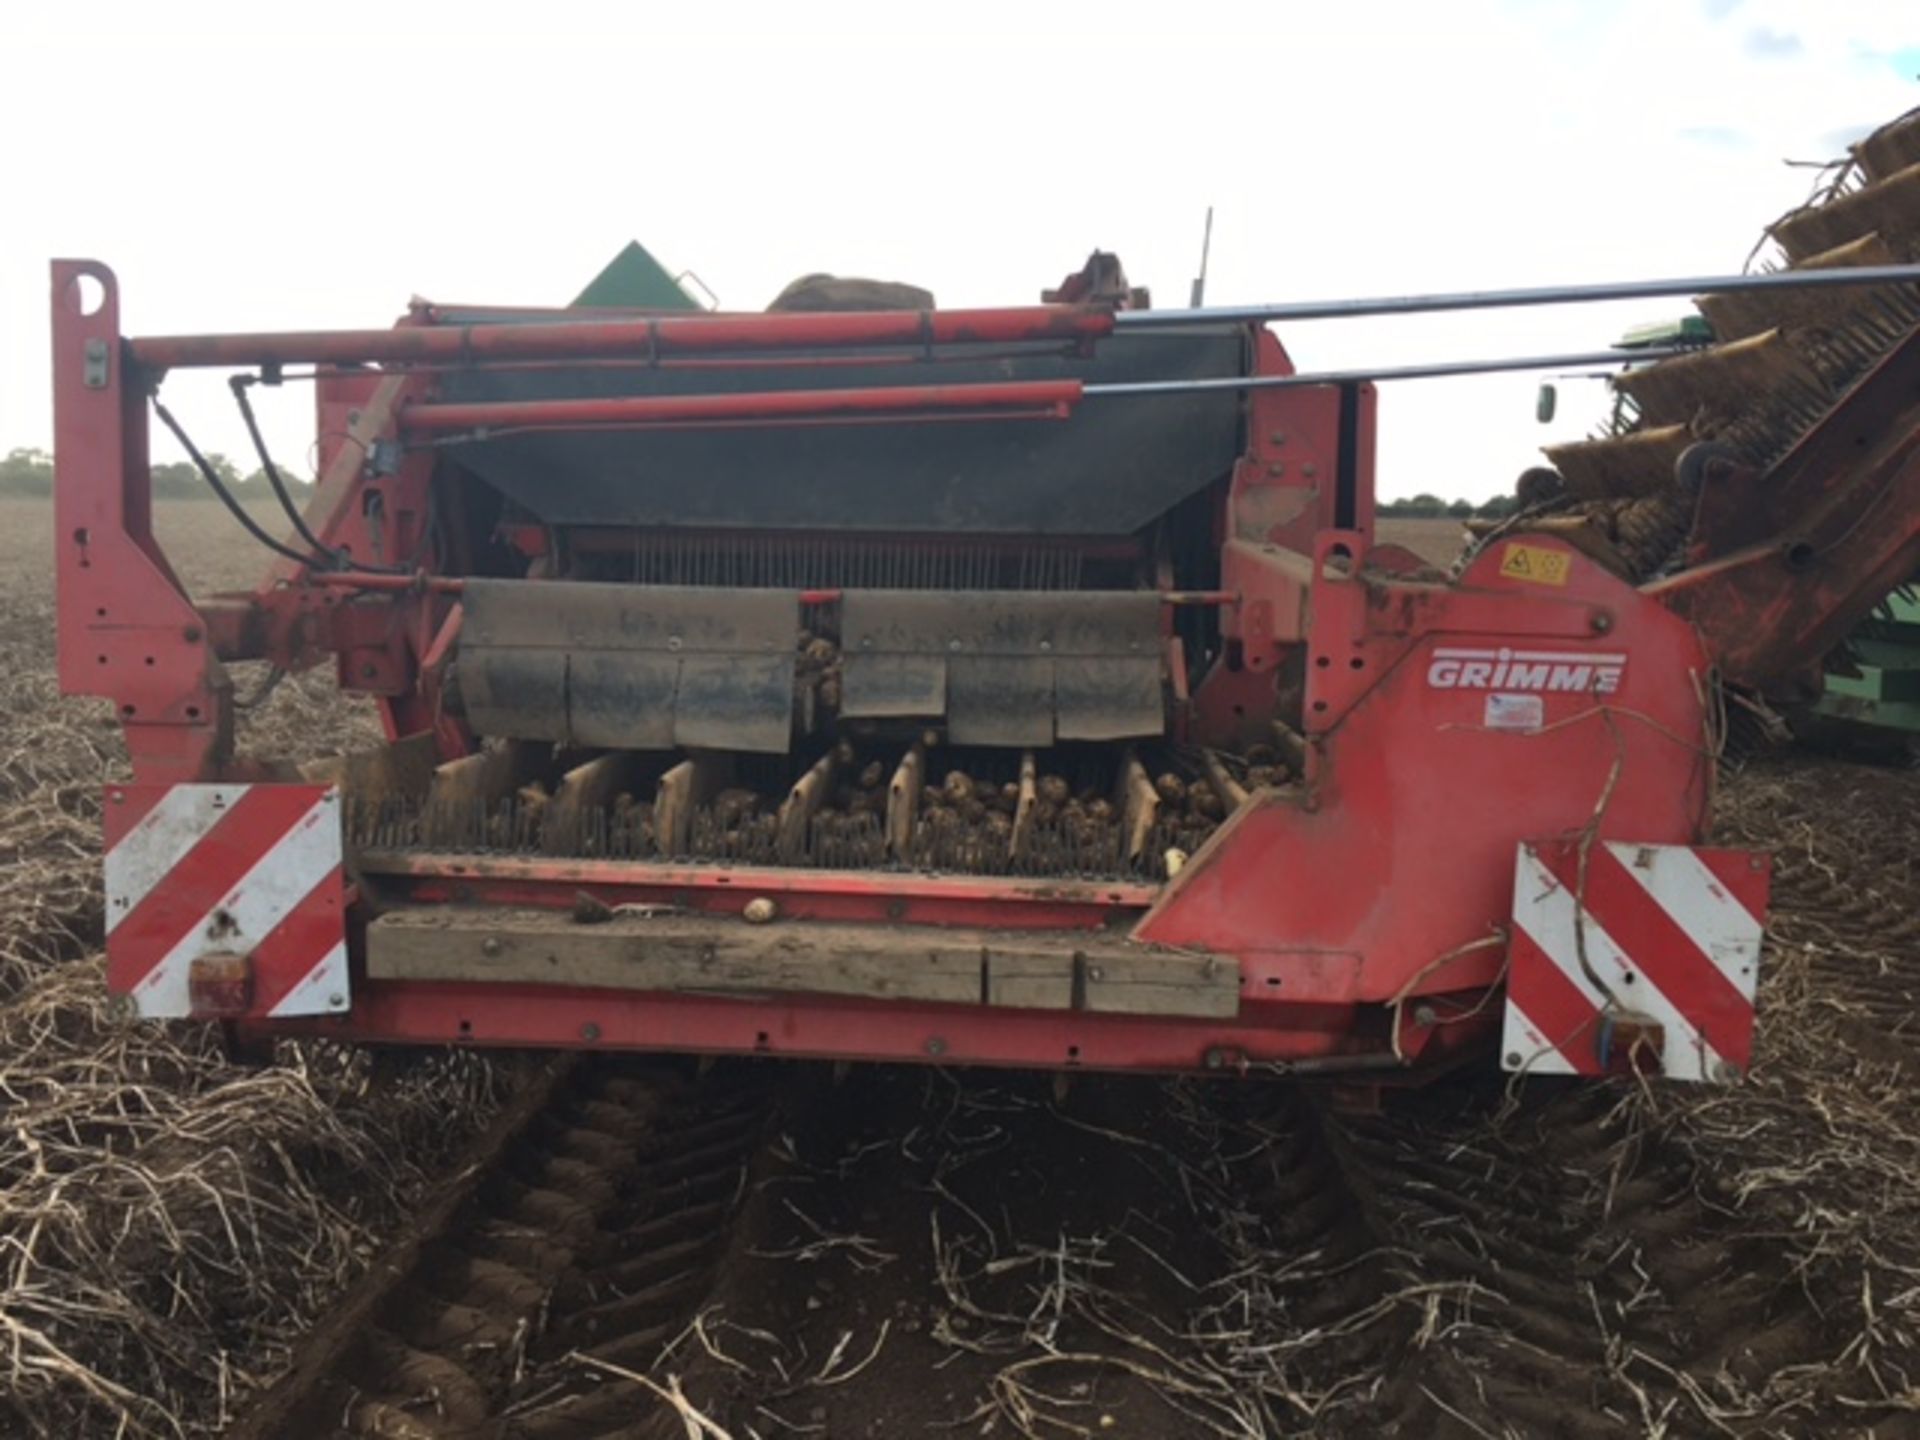 Grimme GT170M potato Harvester. Location Atherstone, Warwickshire. - Image 4 of 4